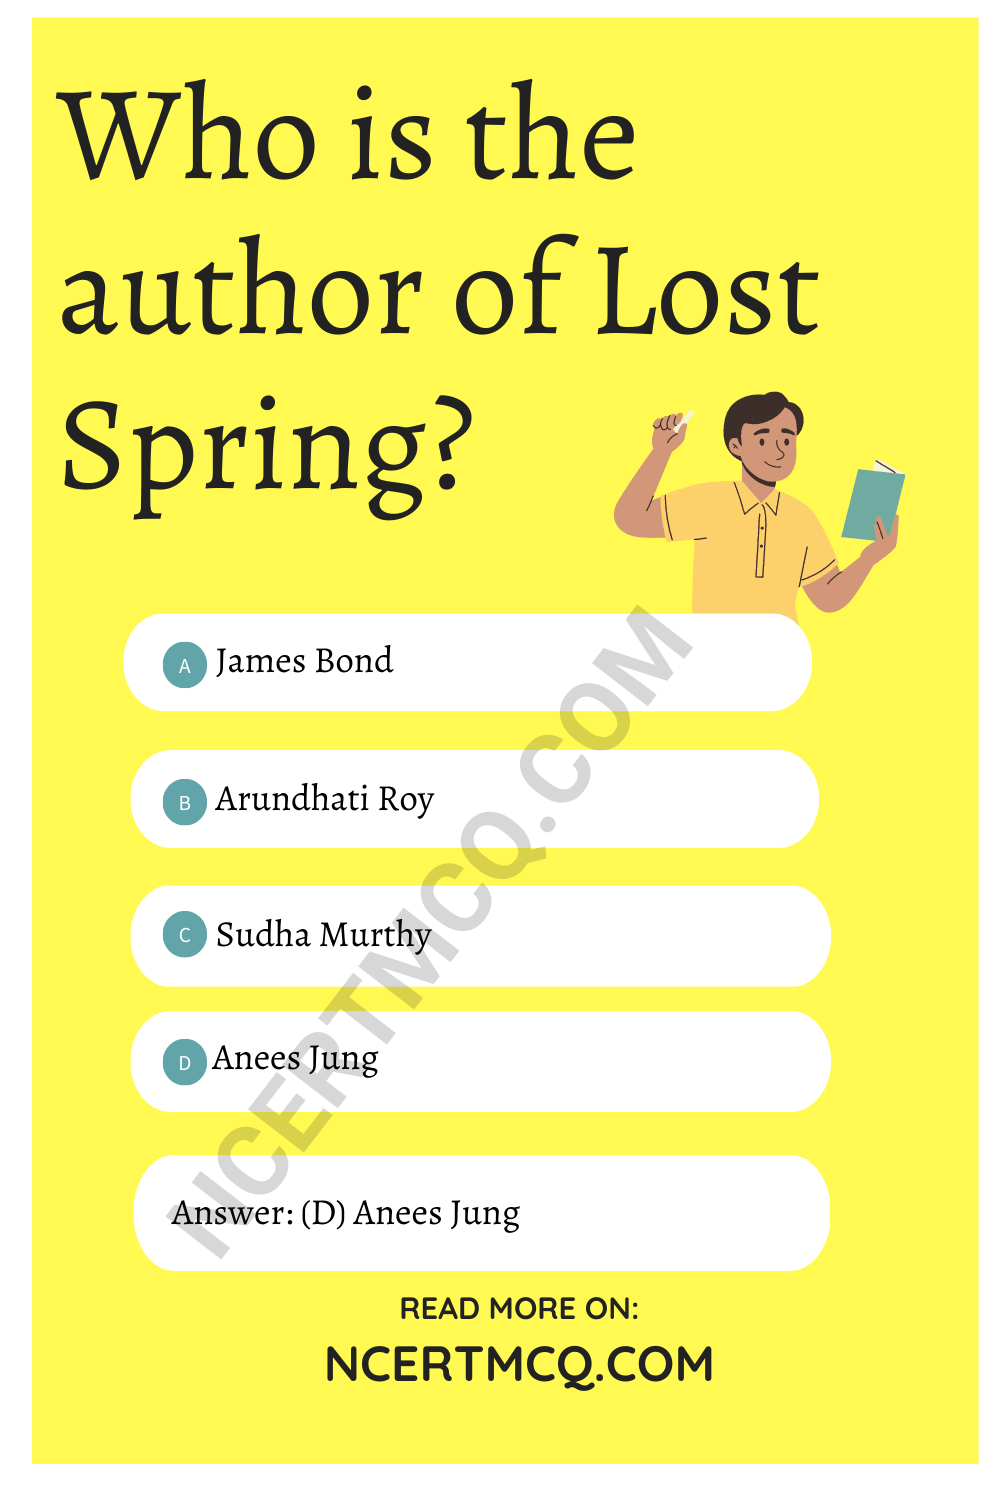 Who is the author of Lost Spring?